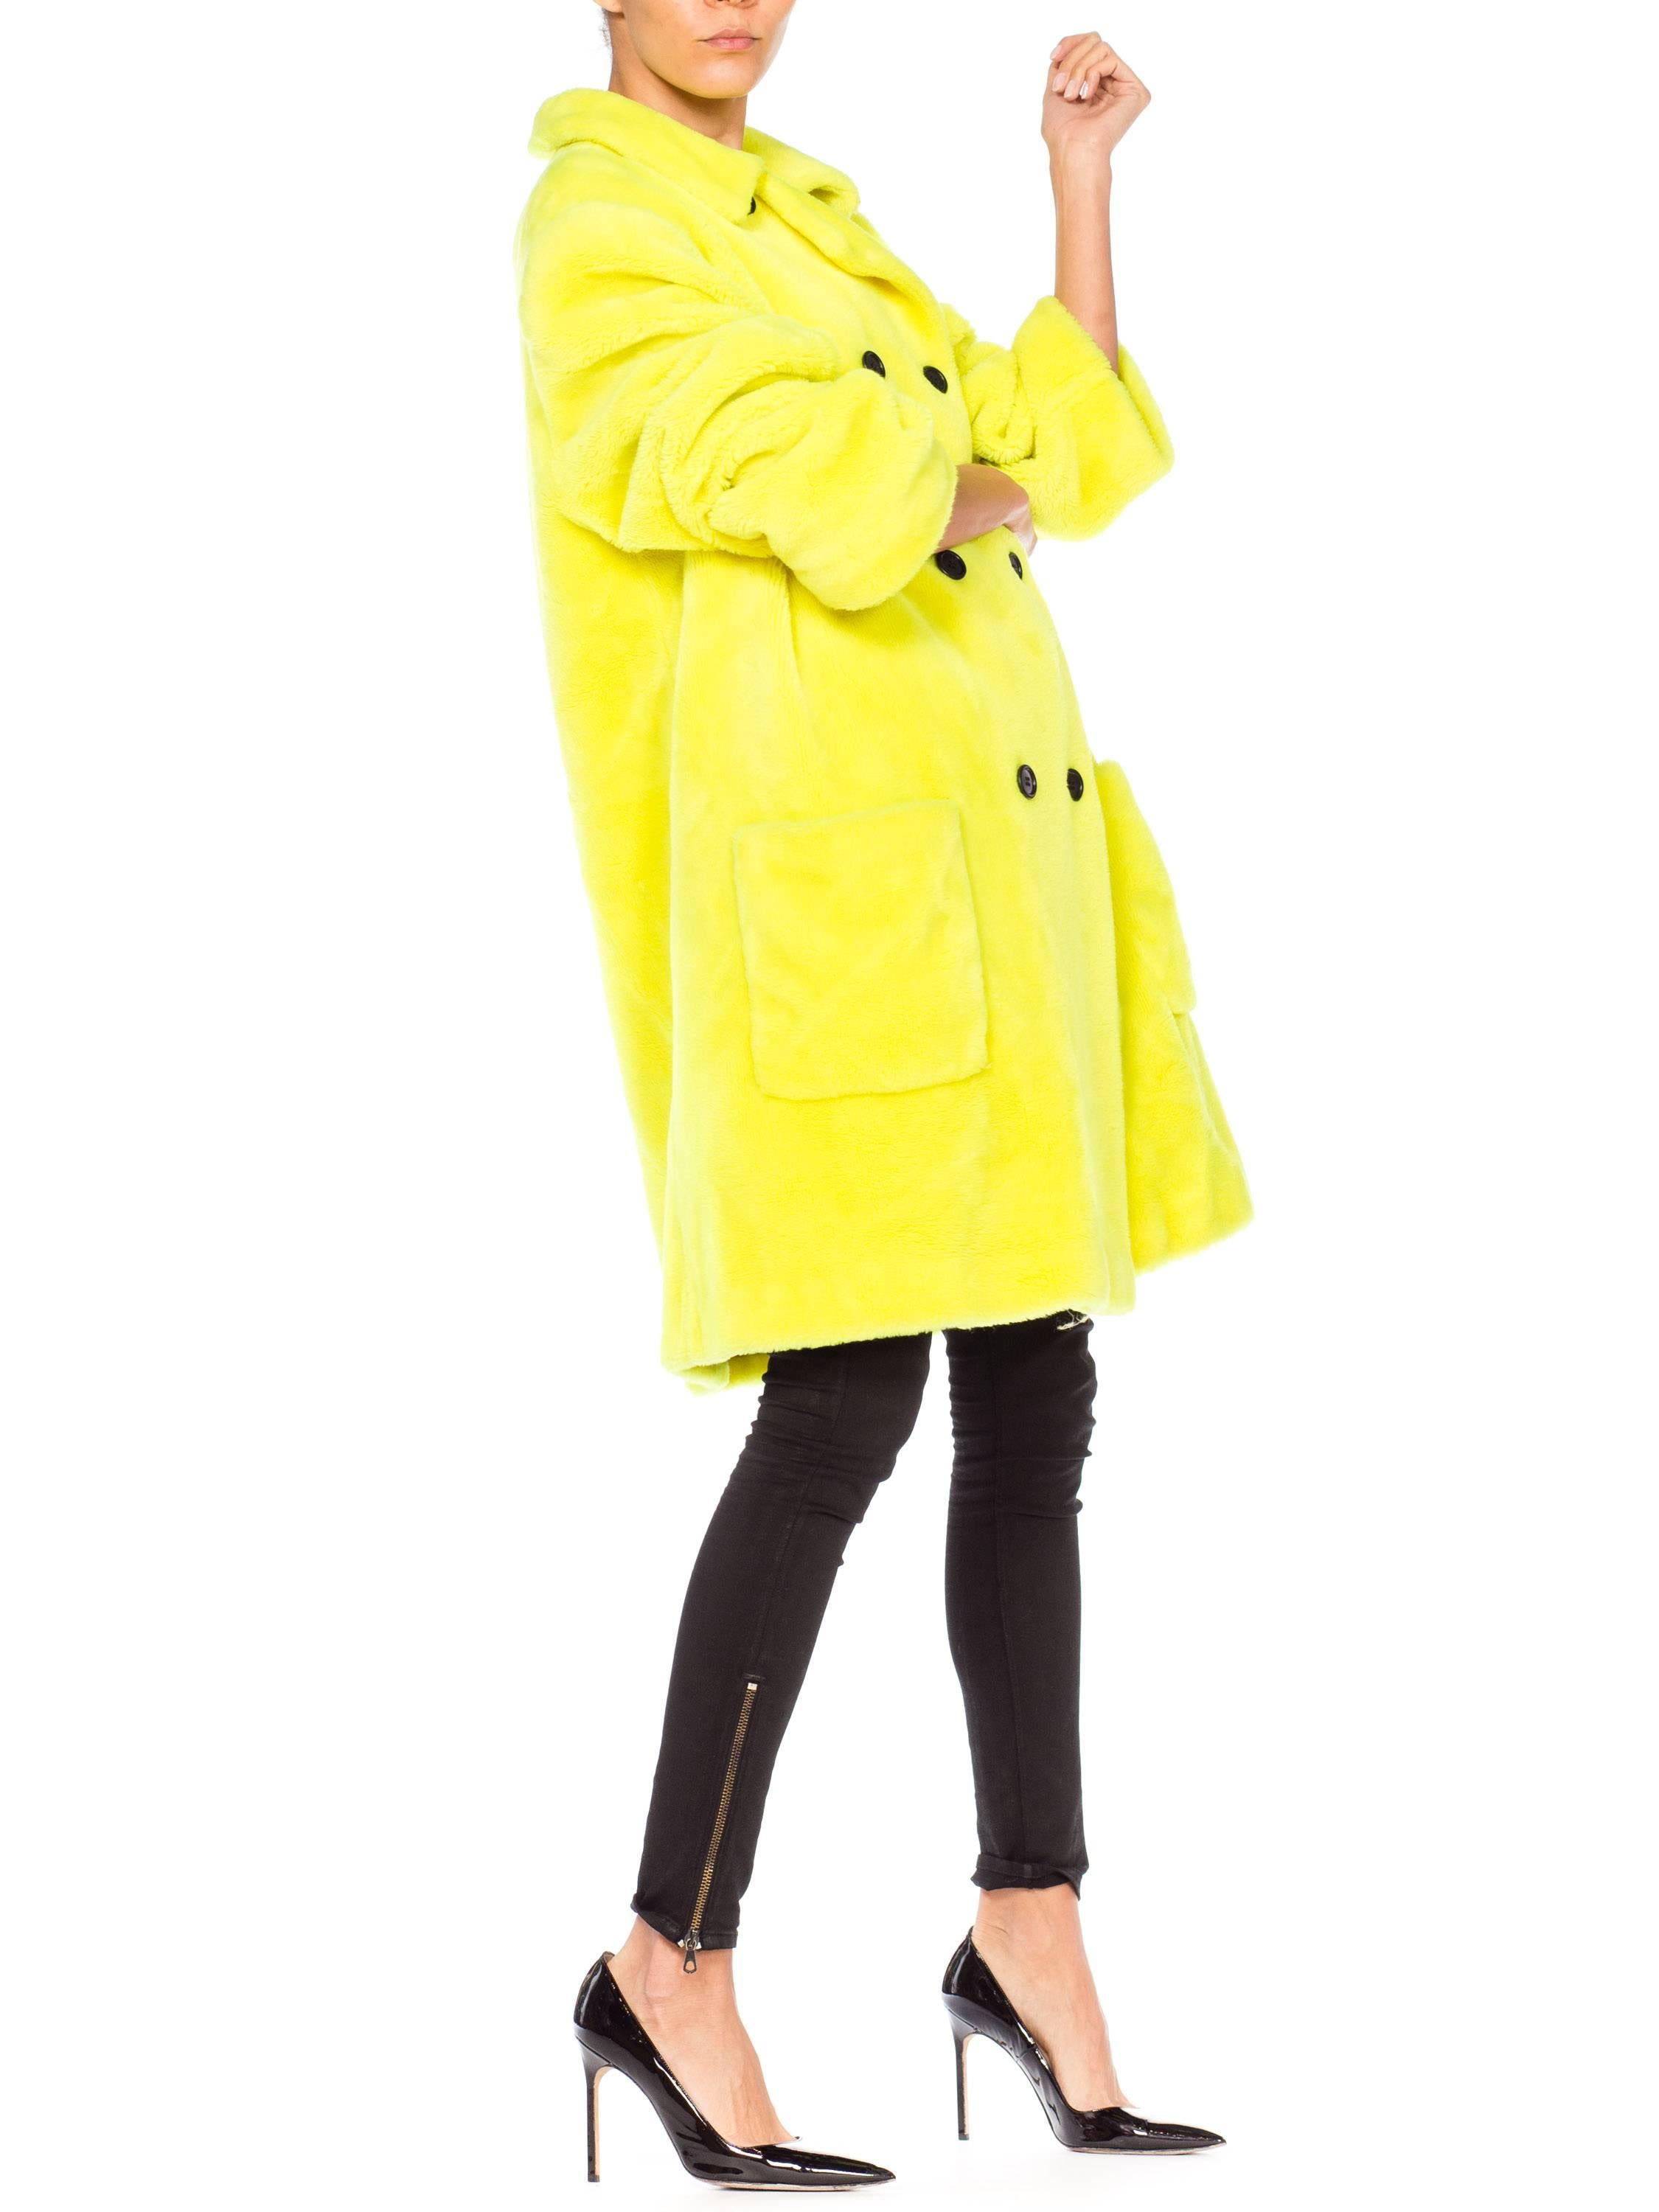 Stephen Sprouse Oversized Highlighter Yellow Faux Fur Coat, 1980s  6